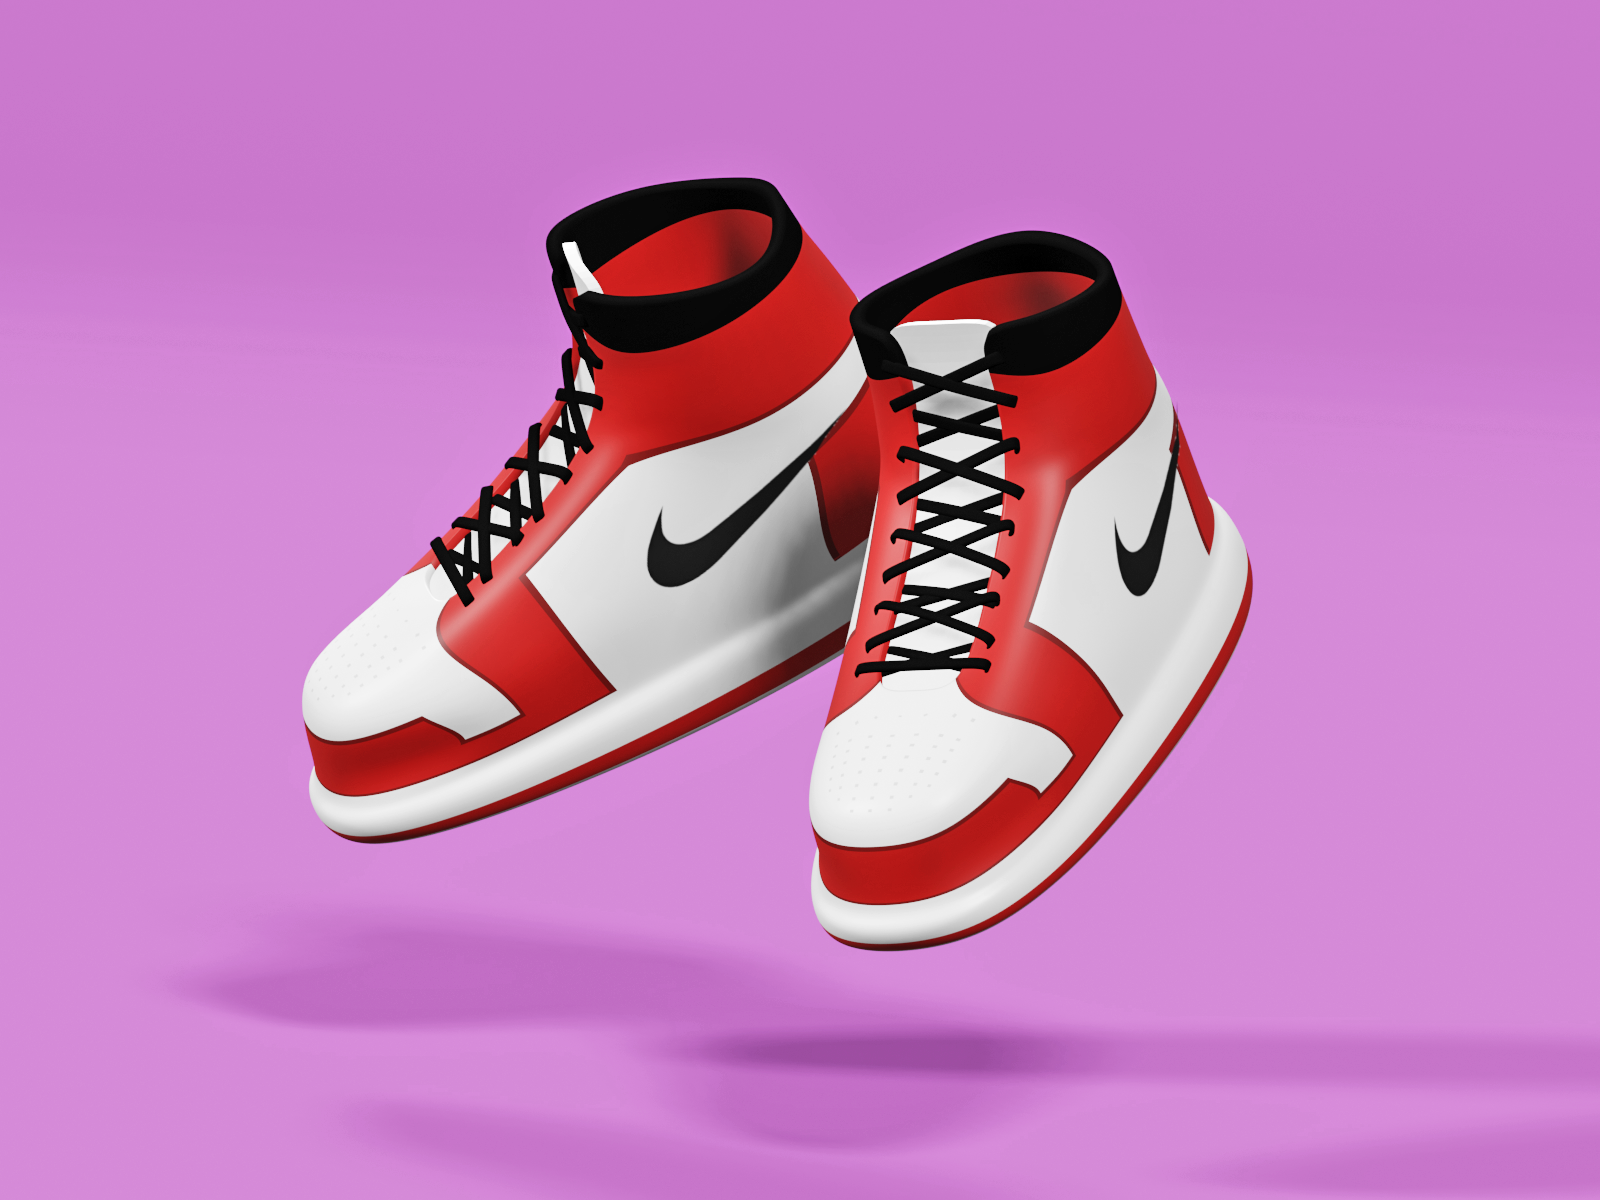 Nike Shoes 3d Illustration by Julius Christian on Dribbble